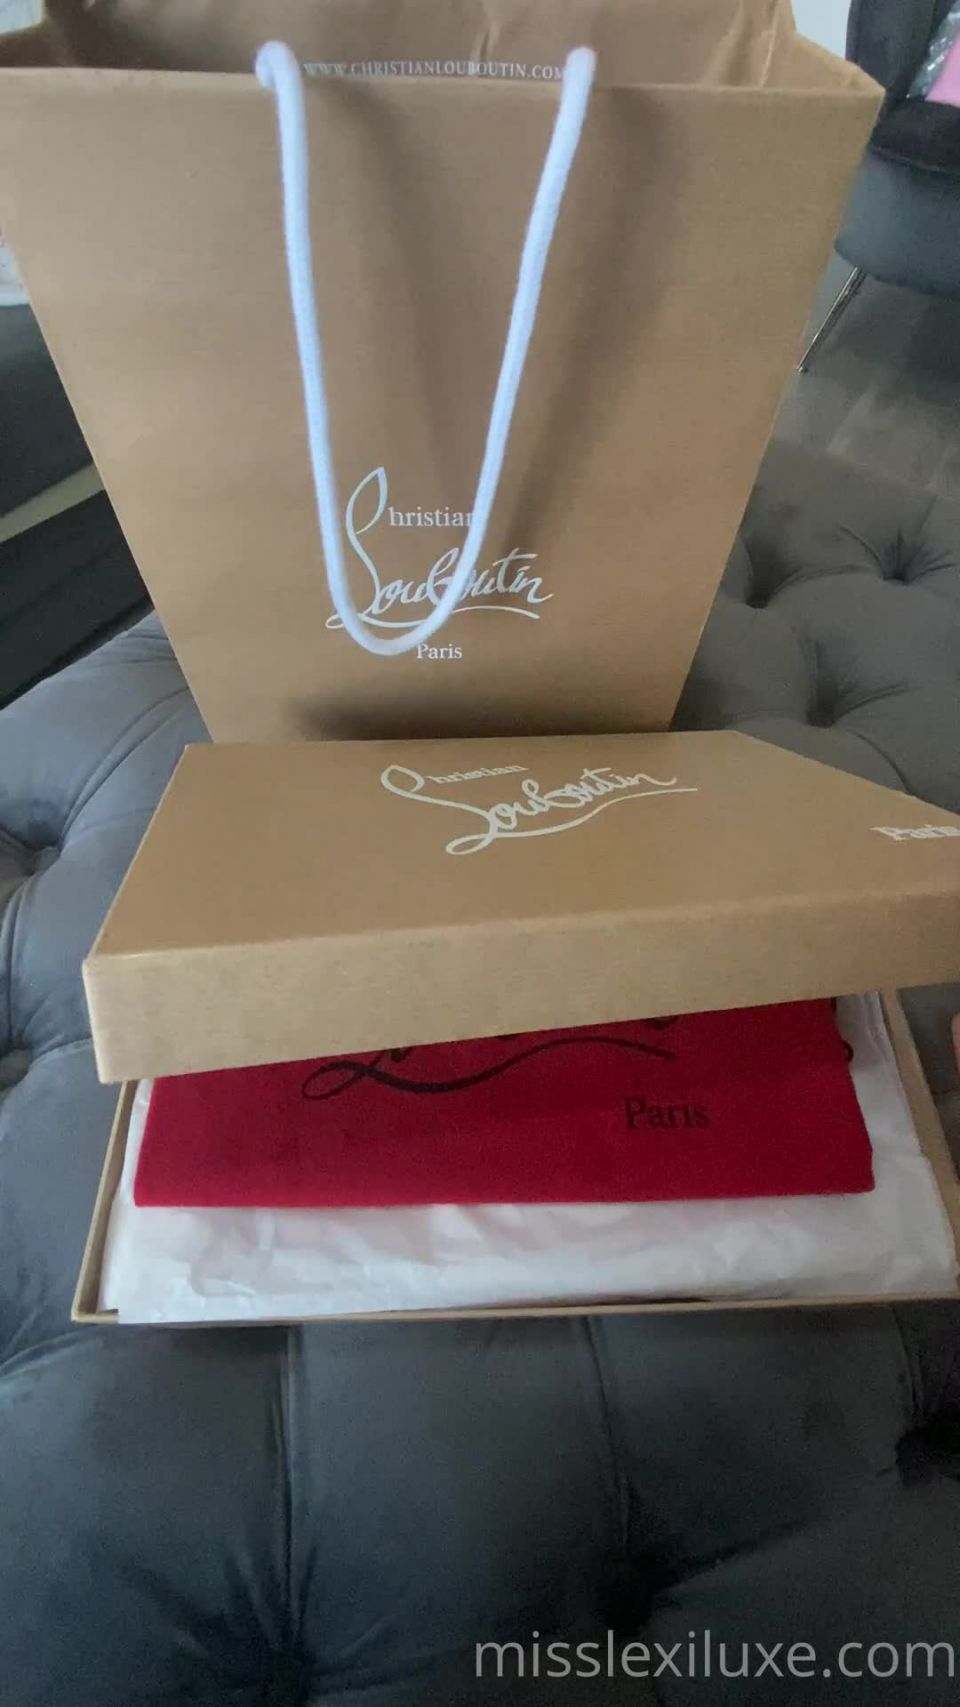 LEXI LUXE Lexiluxe - christian louboutin galativi these little beauties were gifted to 06-05-2021